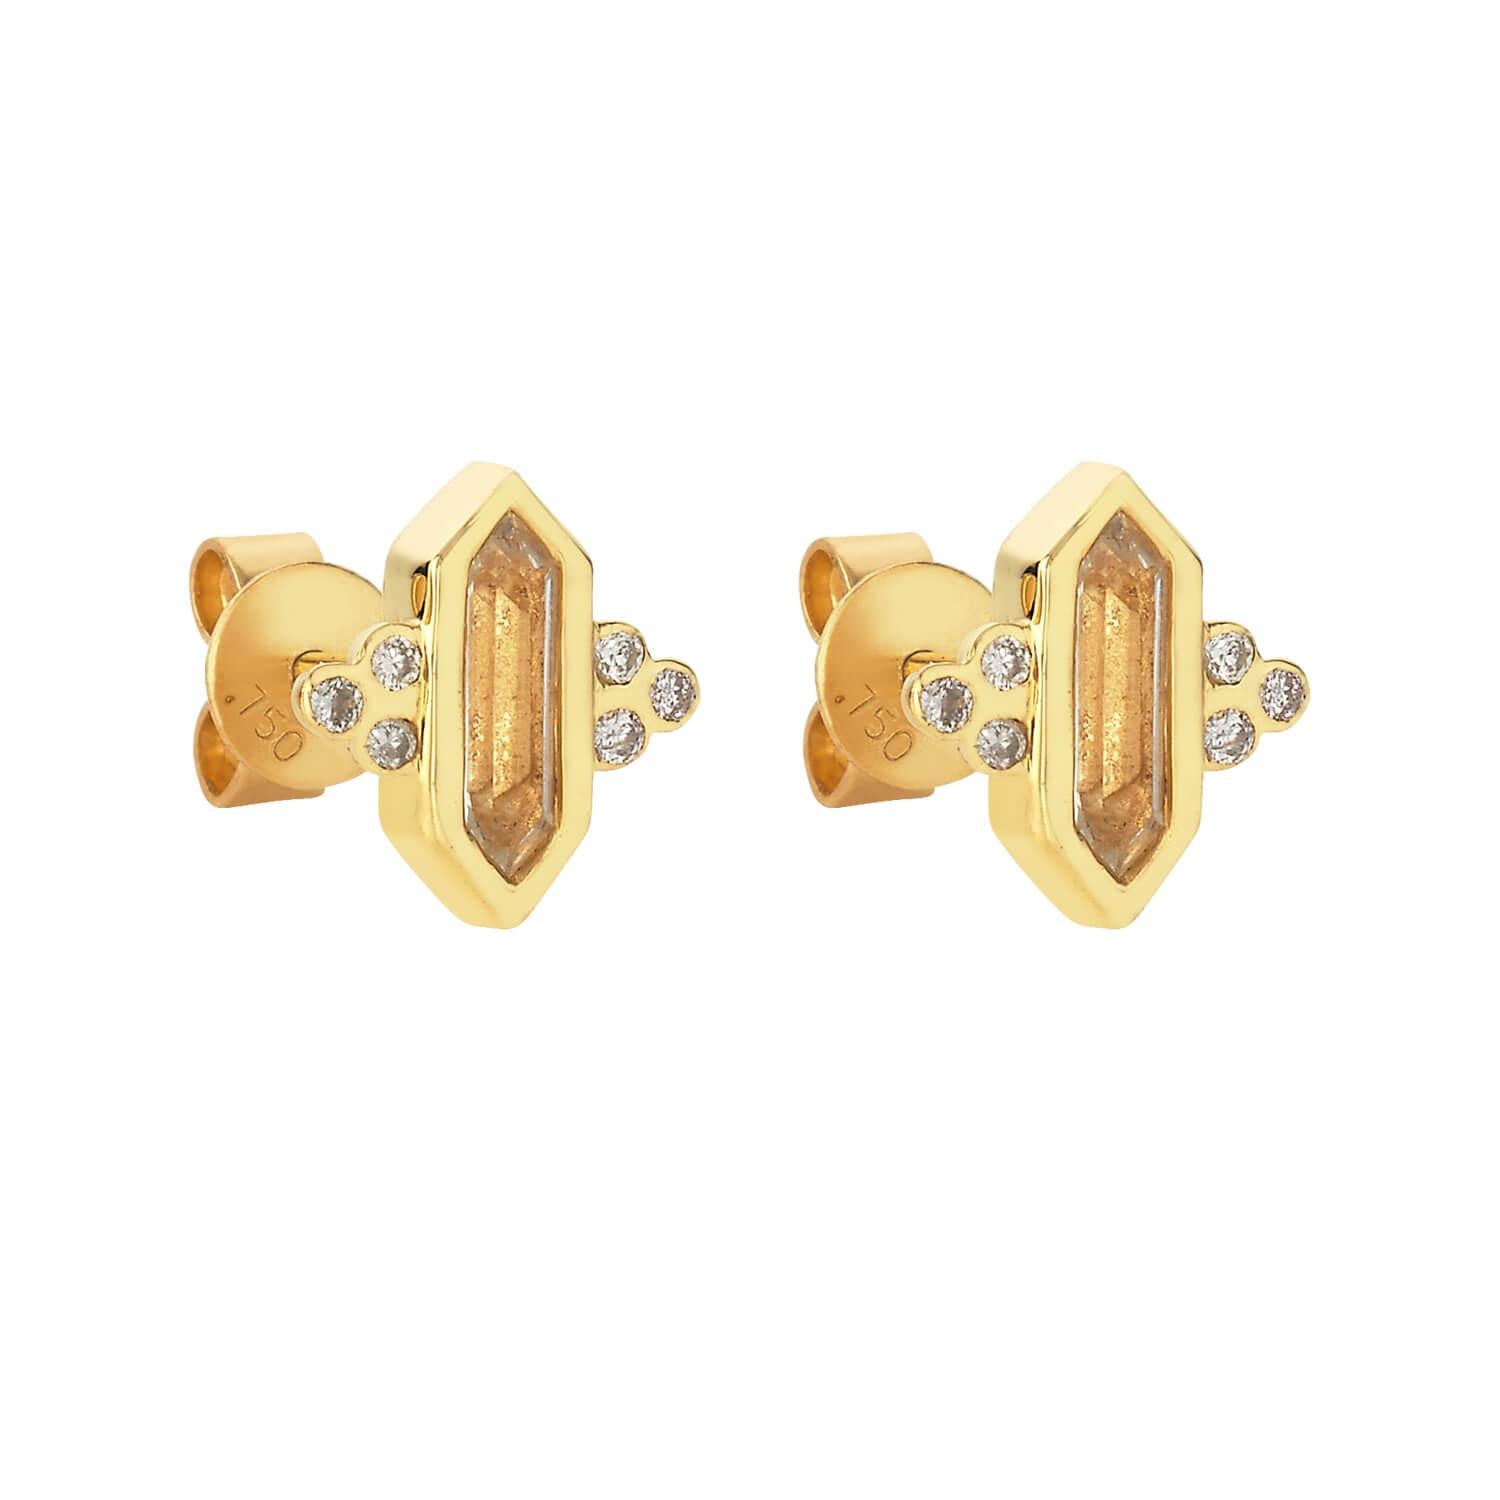 The Kalani stud features the crystal cut Morganites set in an 18k gold frame to perfectly compliment the charm of its geometrical shape. Diamonds adorn either side to create a beaded detailing effect, that sit next to the crystal cut Morganite just